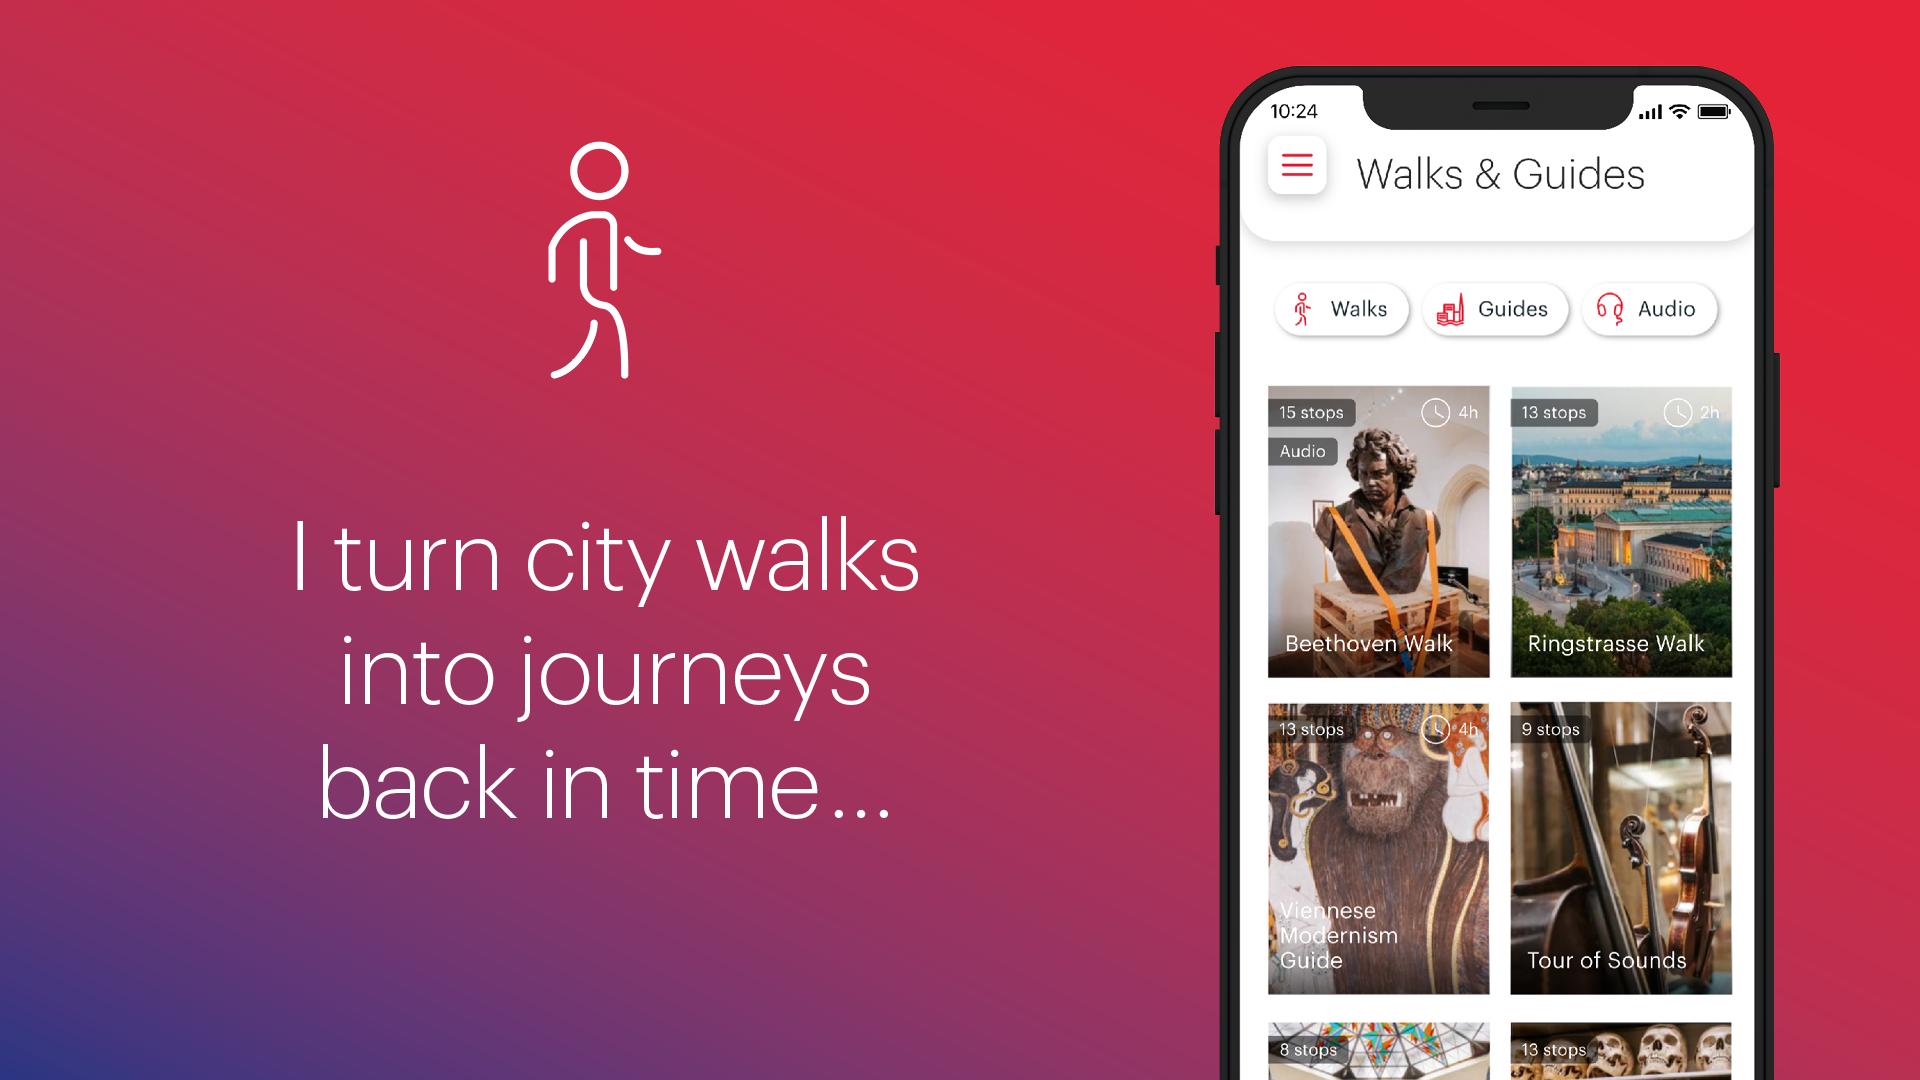 ivie City Guide App - walks and guides